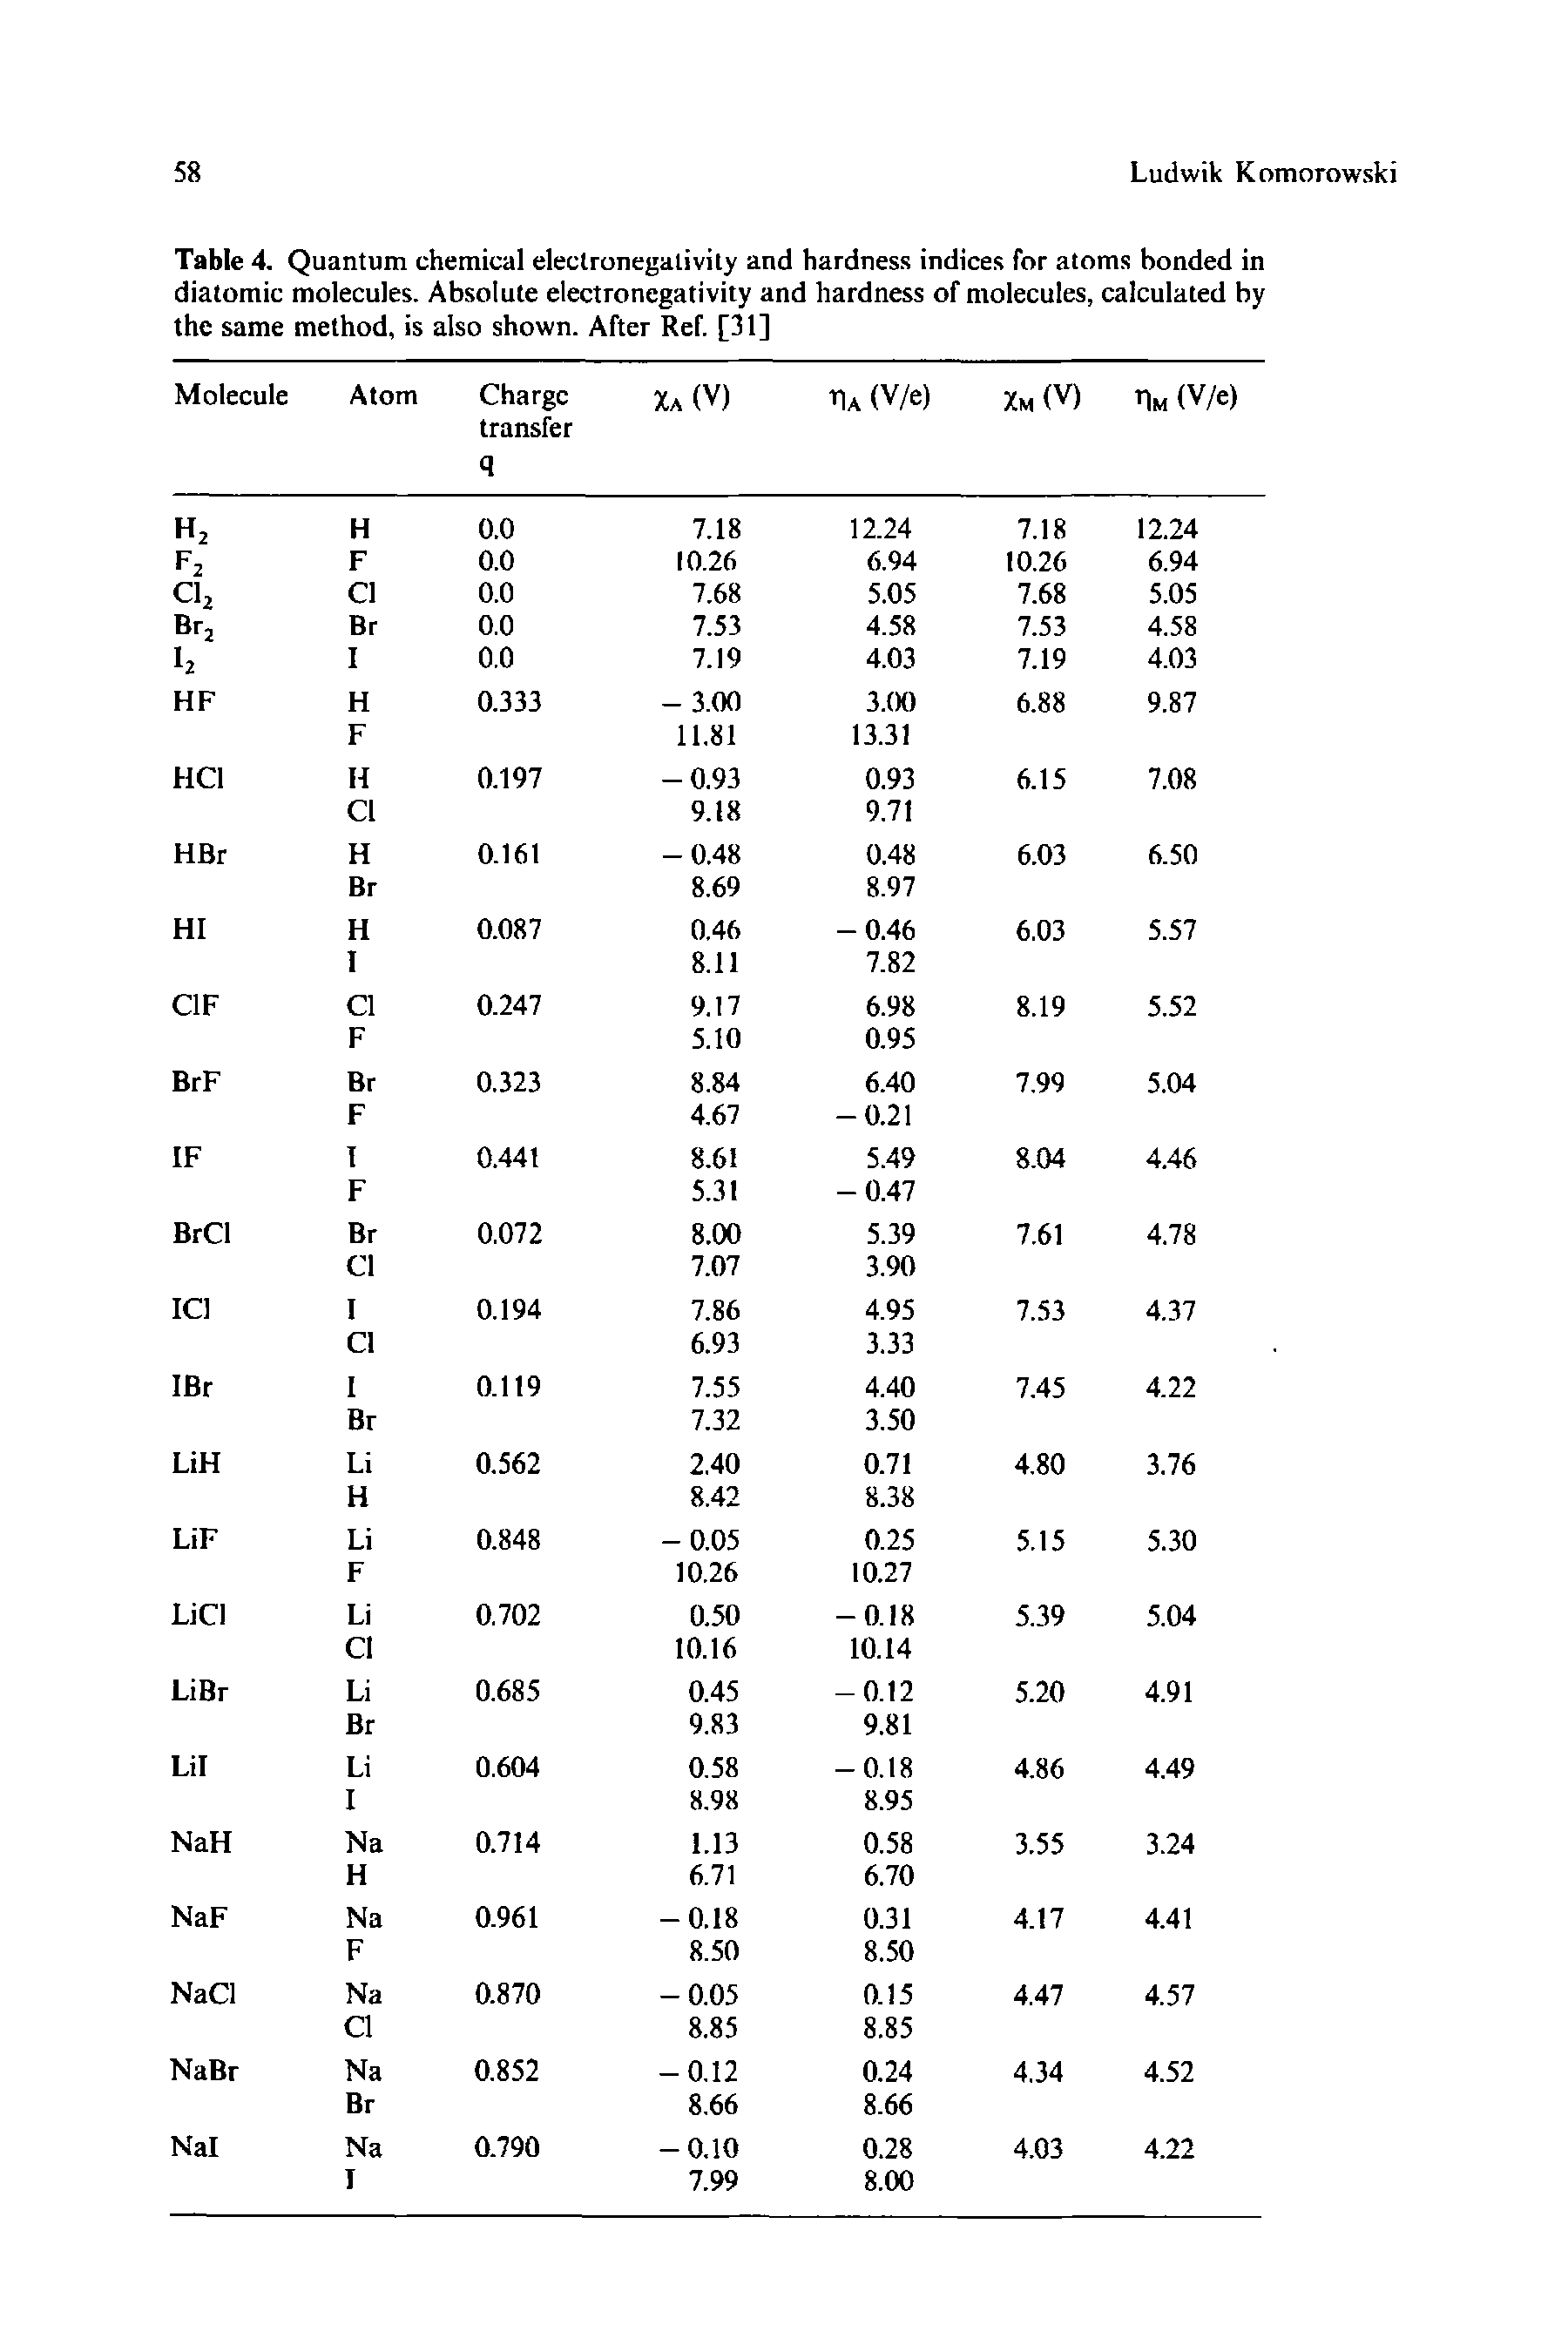 Table 4. Quantum chemical electronegativity and hardness indices for atoms bonded in diatomic molecules. Absolute electronegativity and hardness of molecules, calculated by the same method, is also shown. After Ref. [31]...